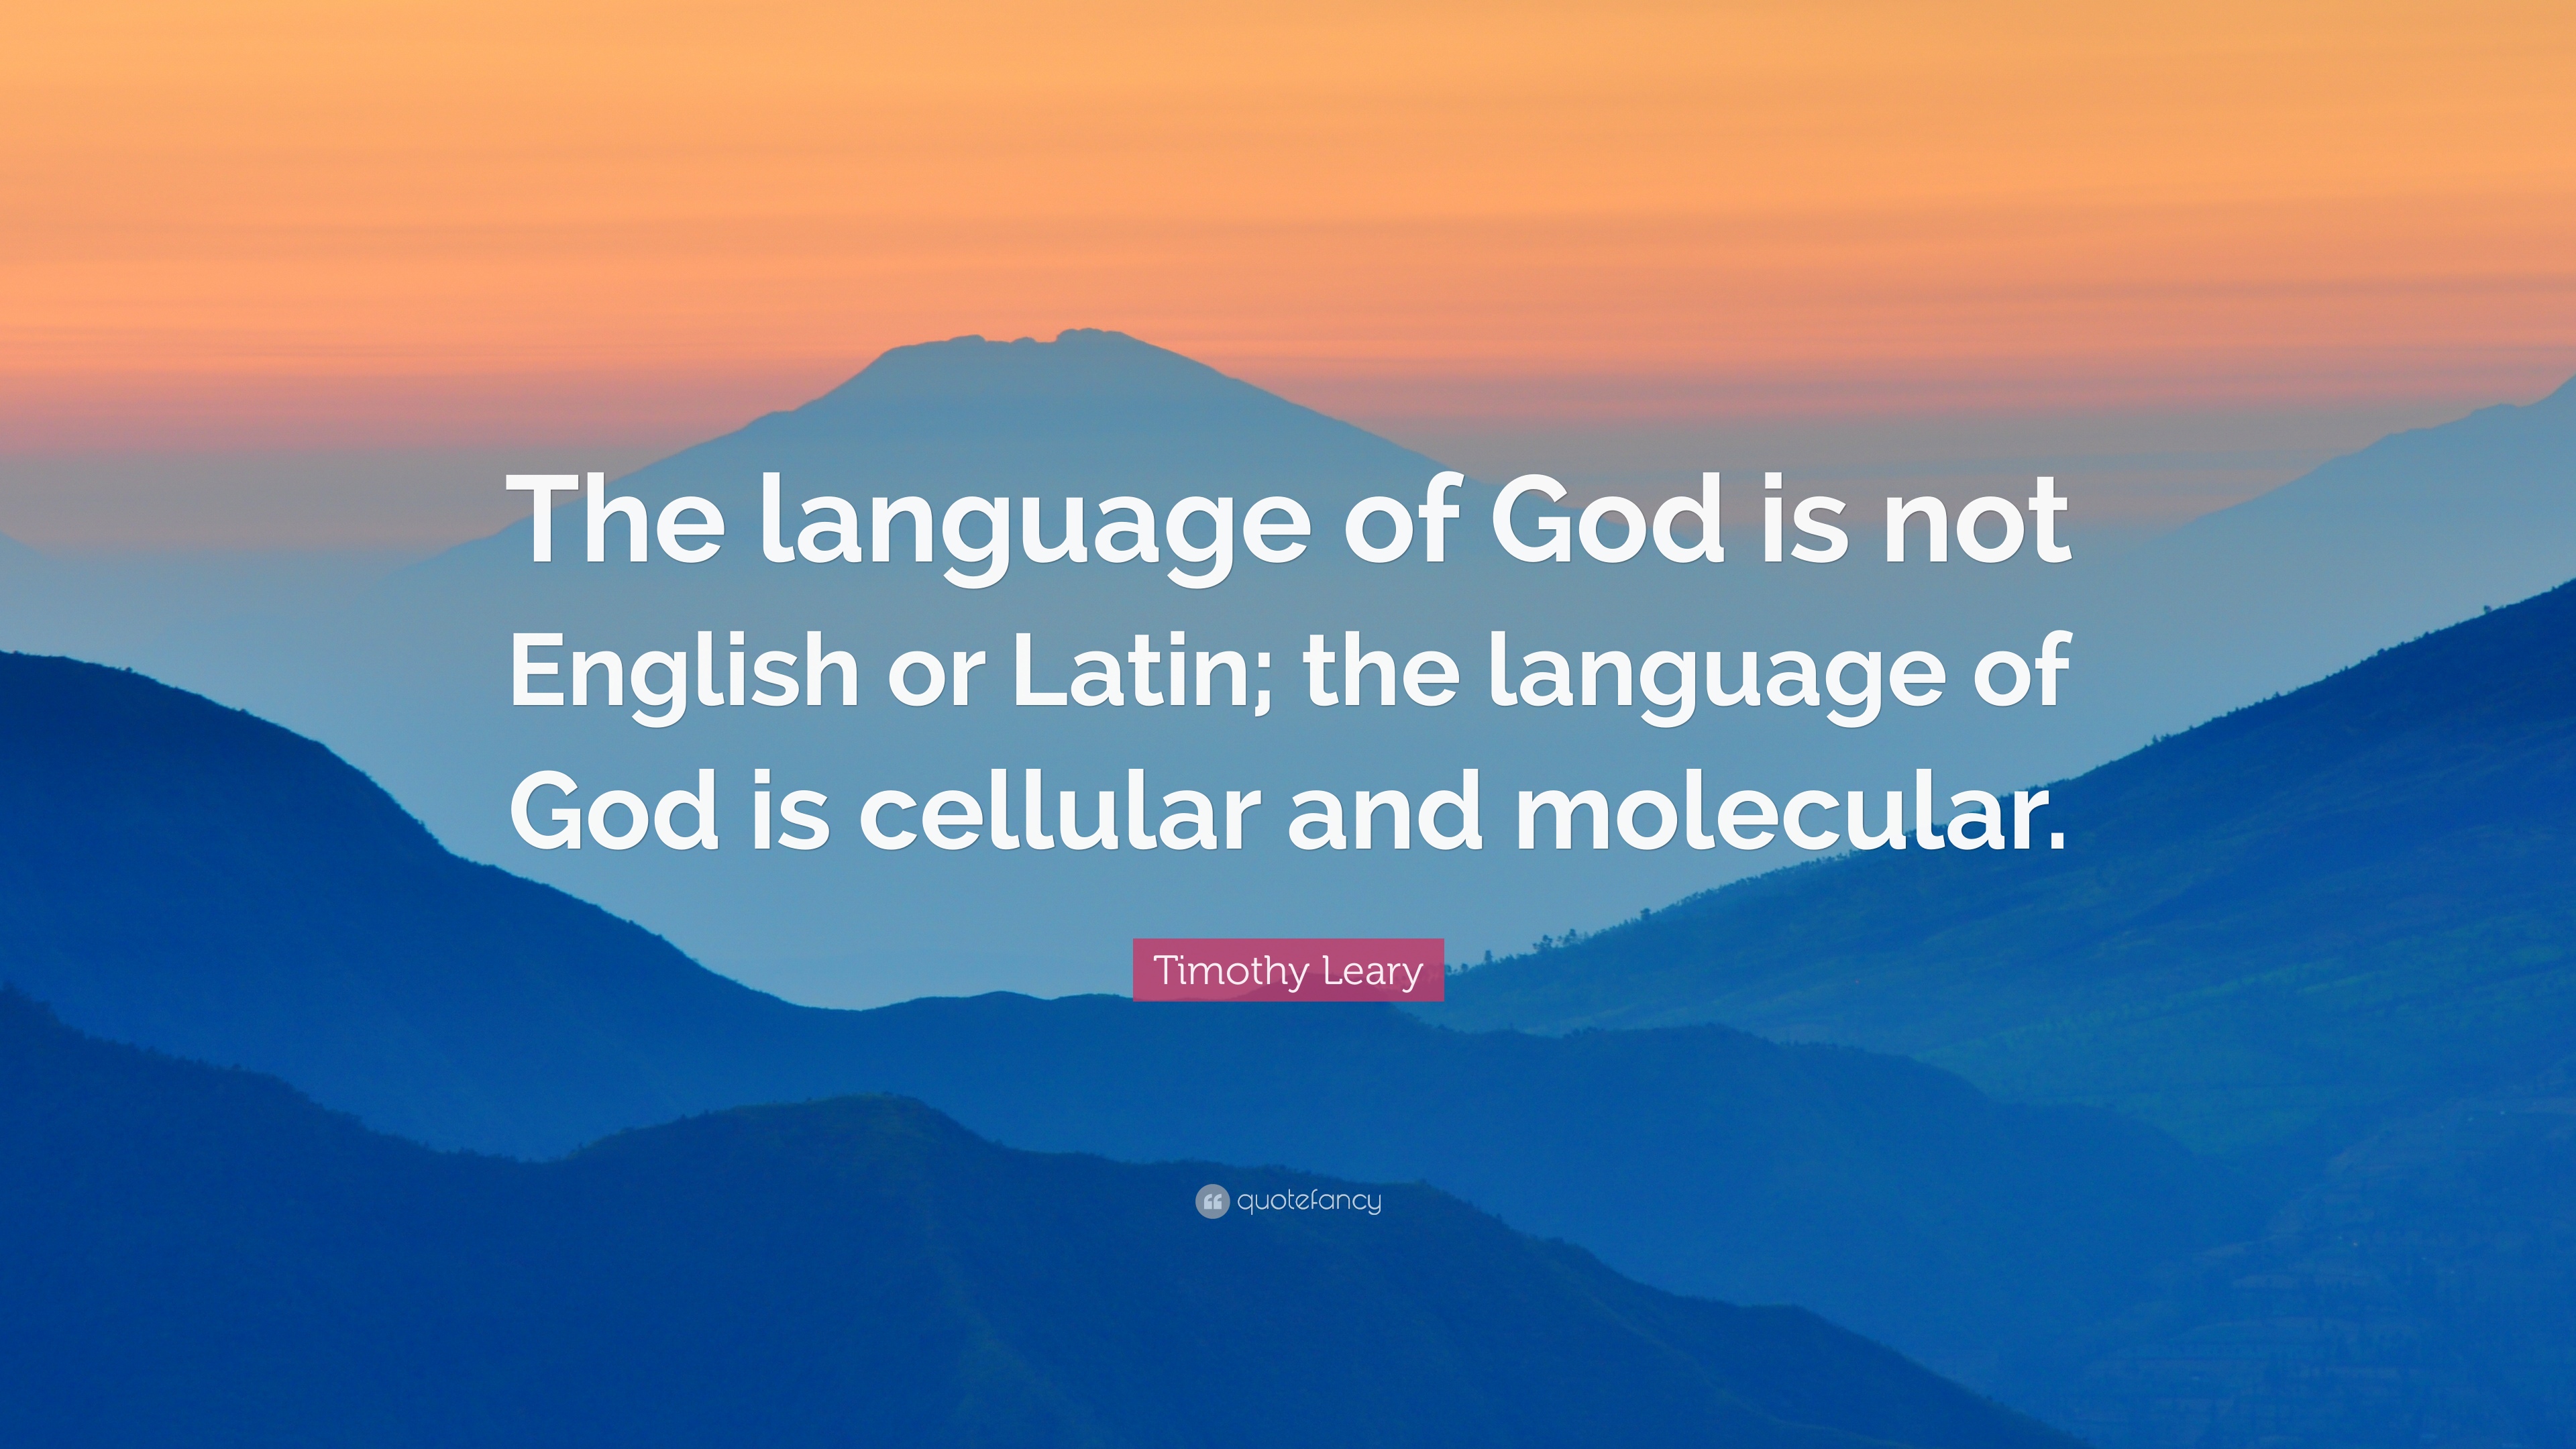 Timothy Leary Quote: “The language of God is not English or Latin